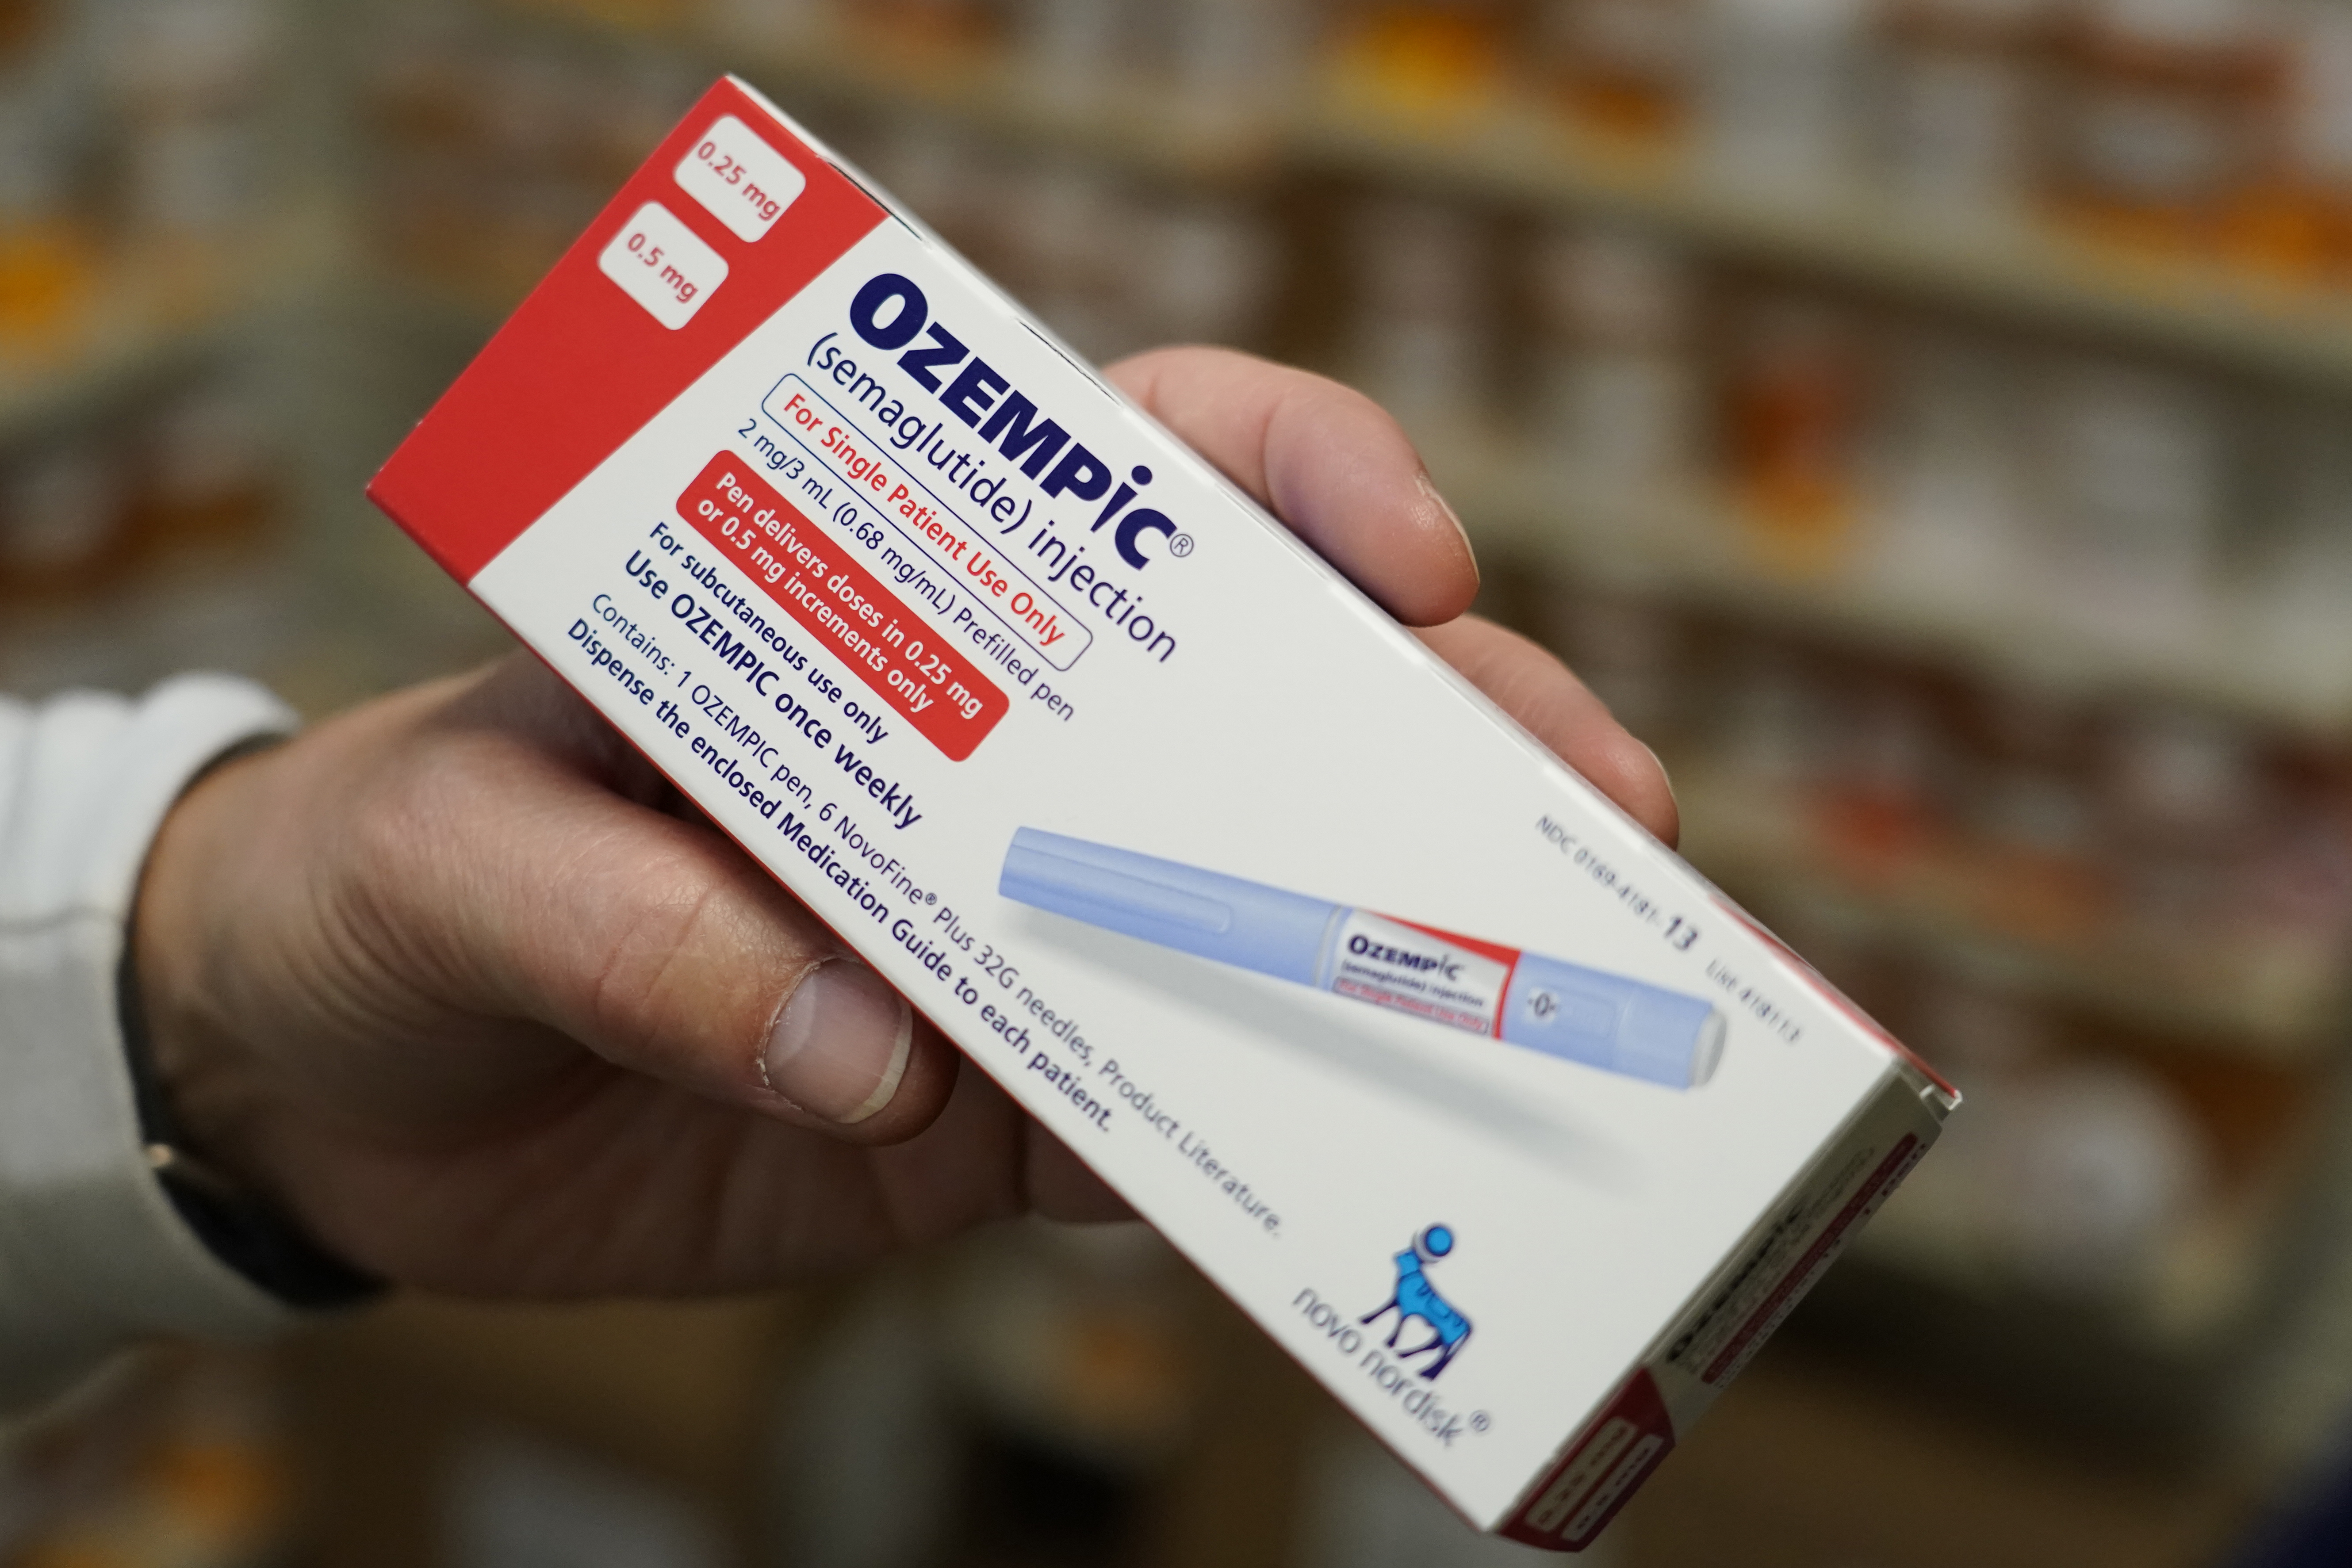 A pharmacist holds a box of Ozempic with the label visible.